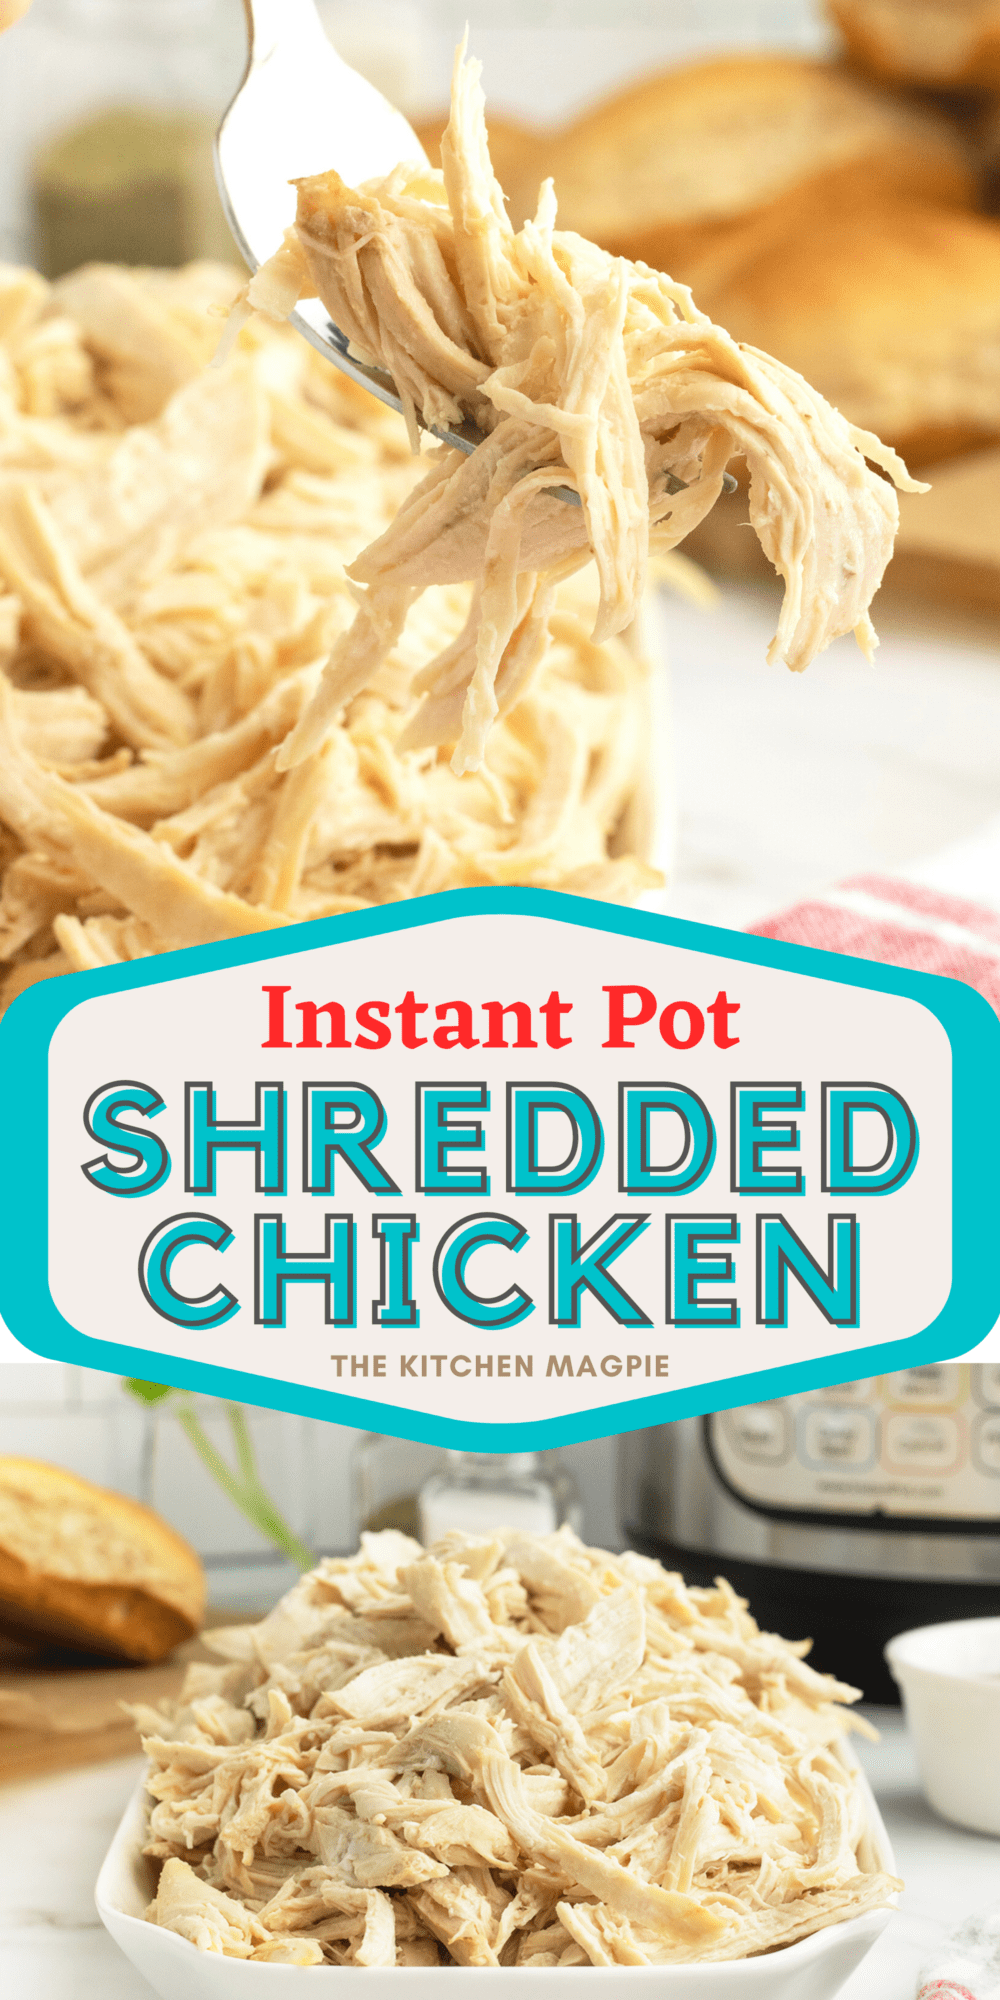 Juicy and tender Instant Pot shredded chicken breast that cooks up in a jiffy! 